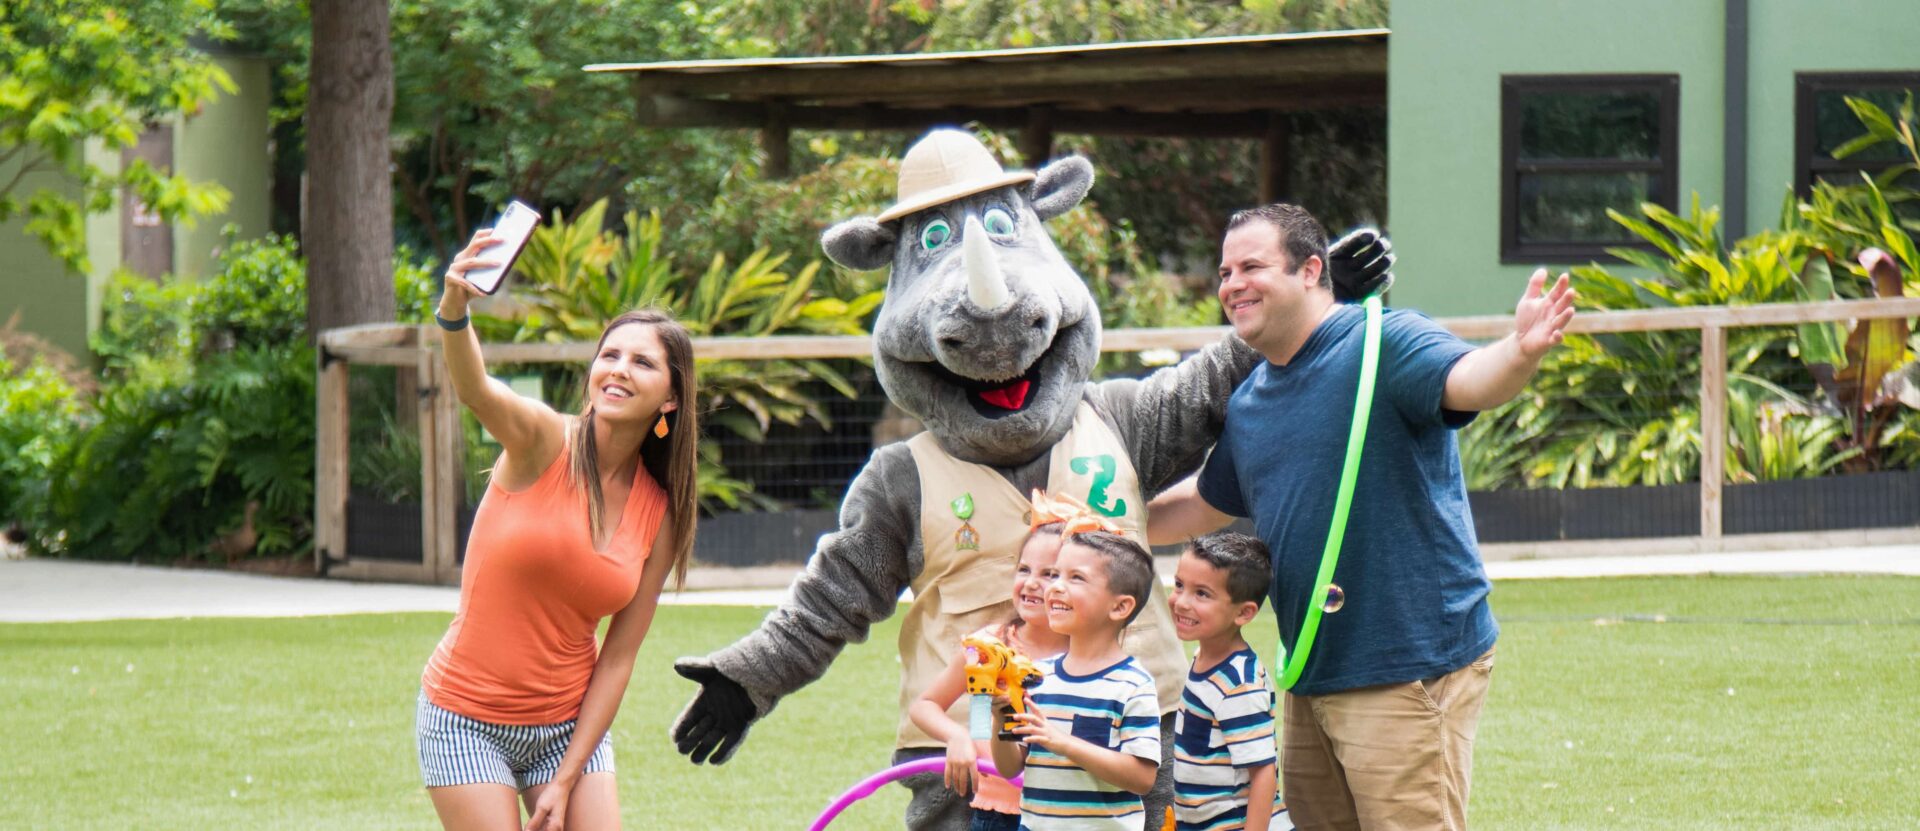 A family at the zoo posing with a rhino mascot